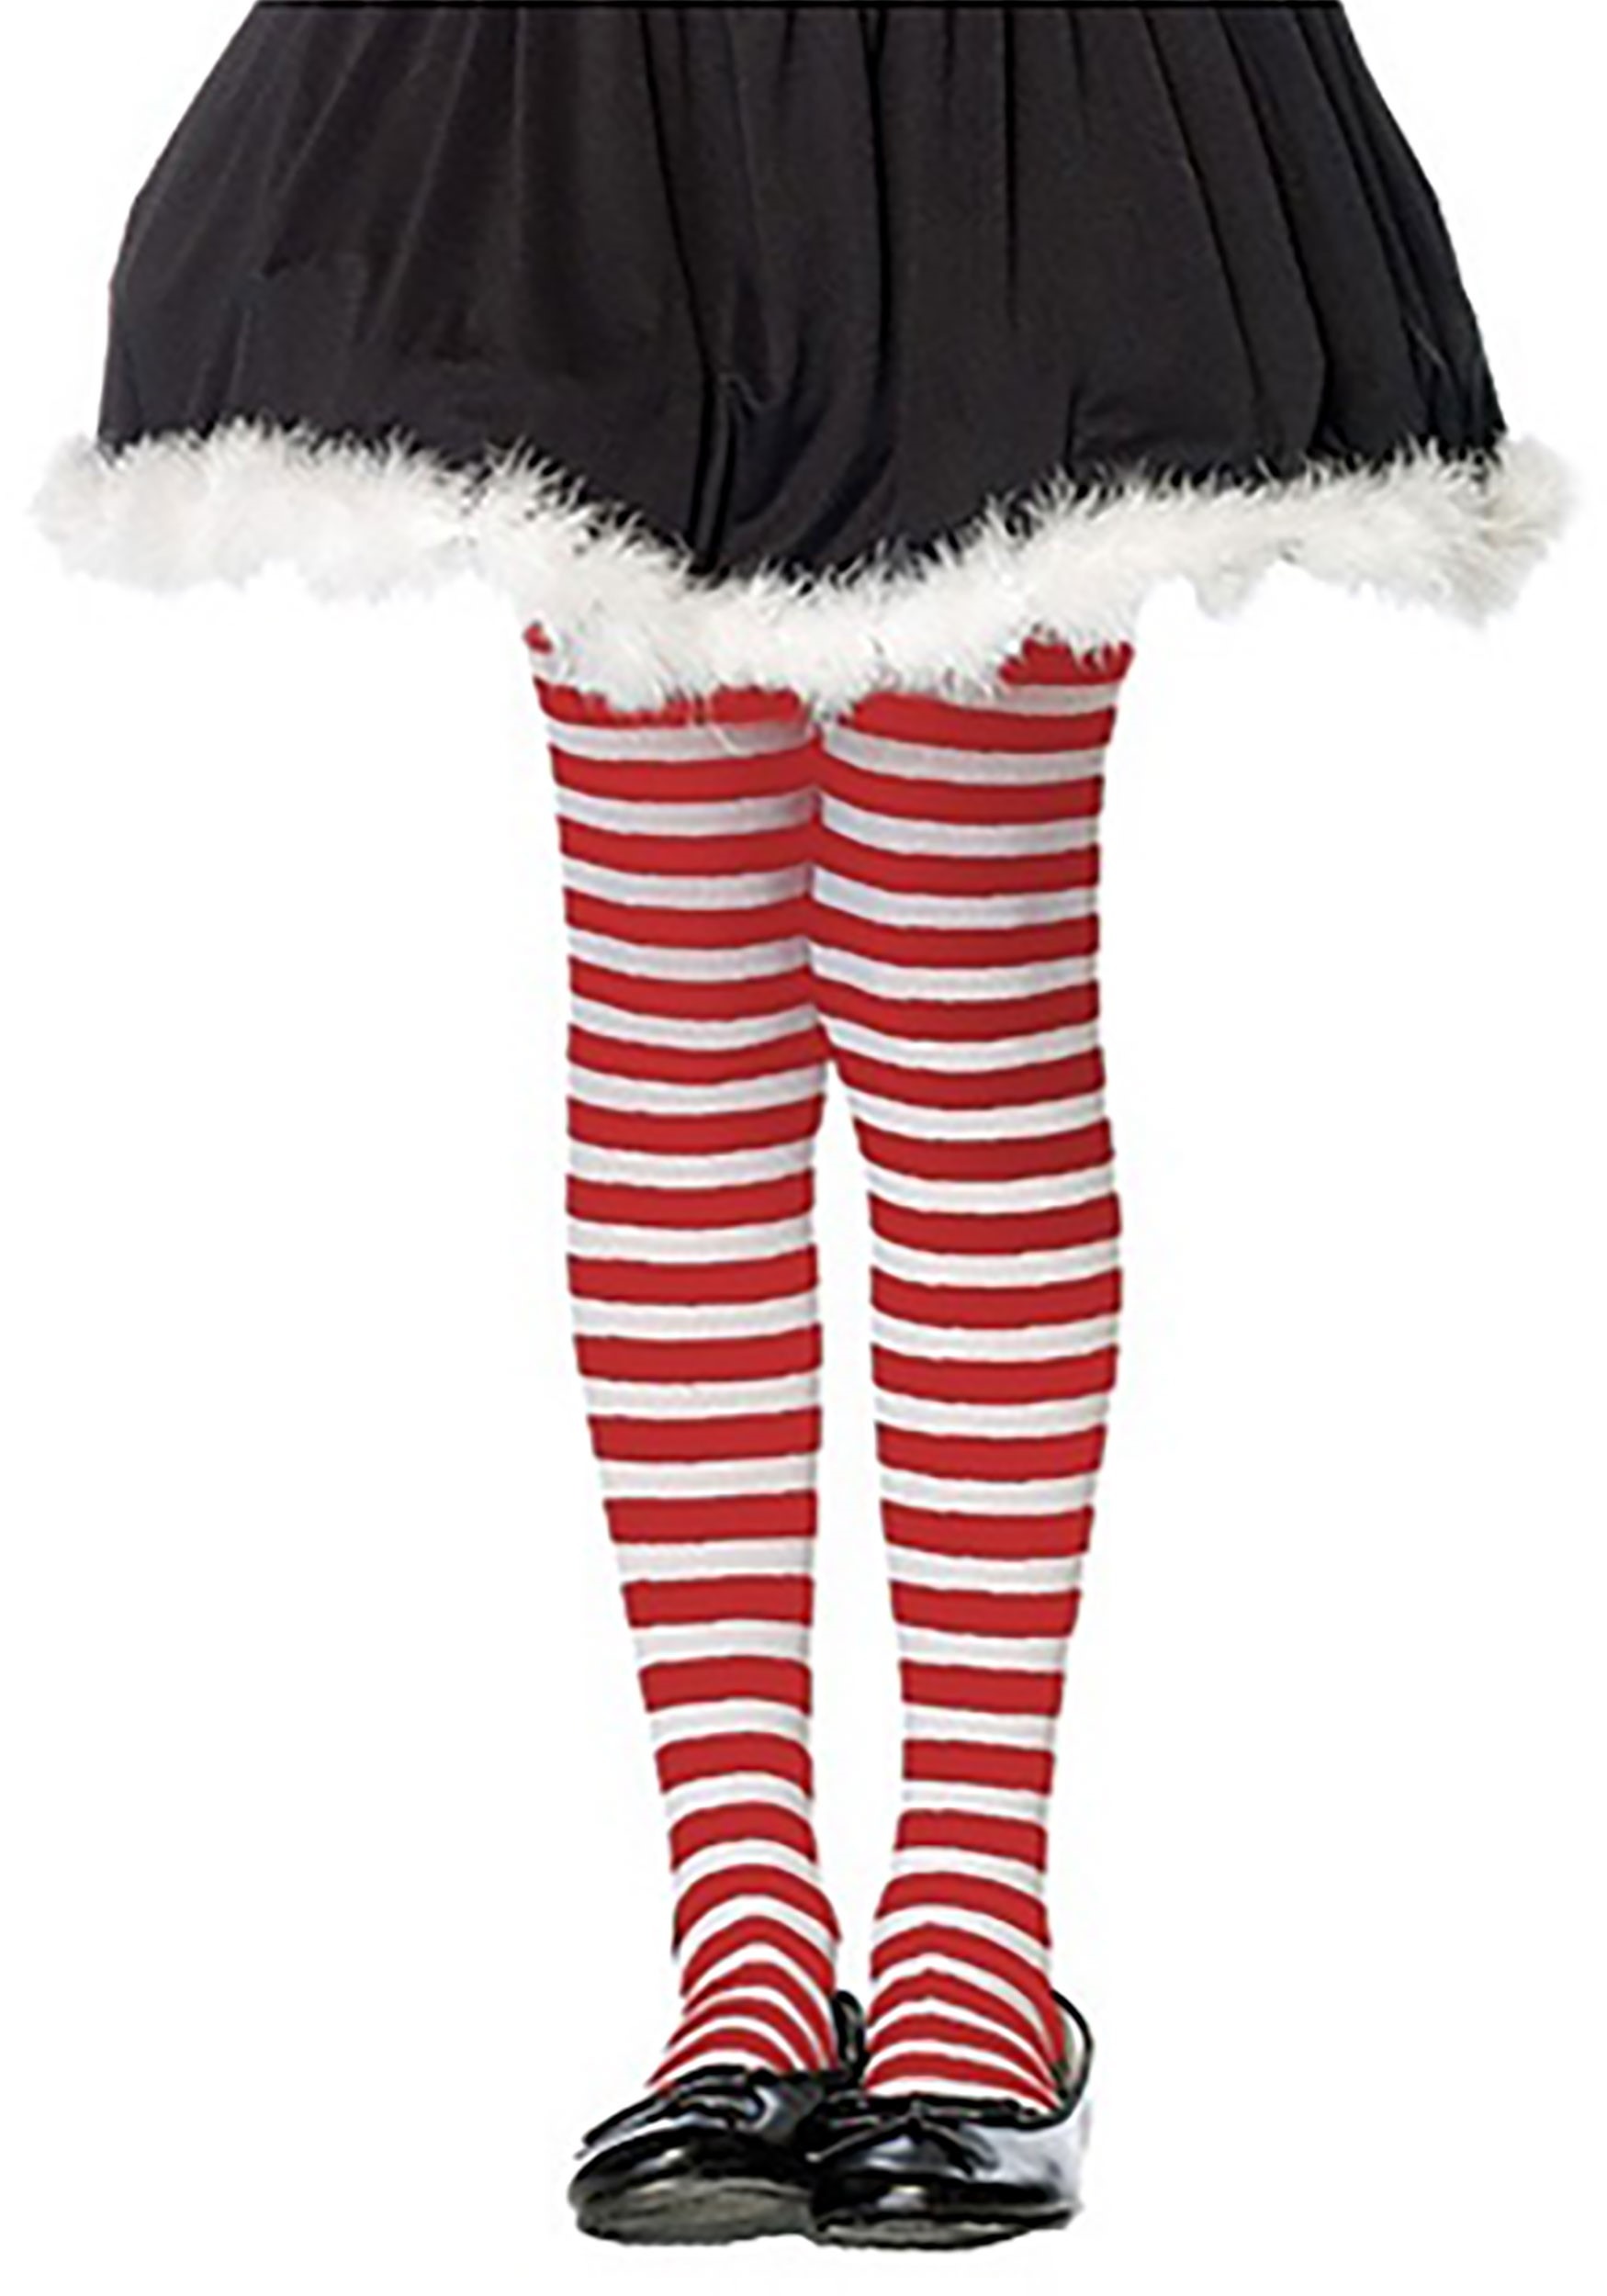 Red and White Striped Kids Tights